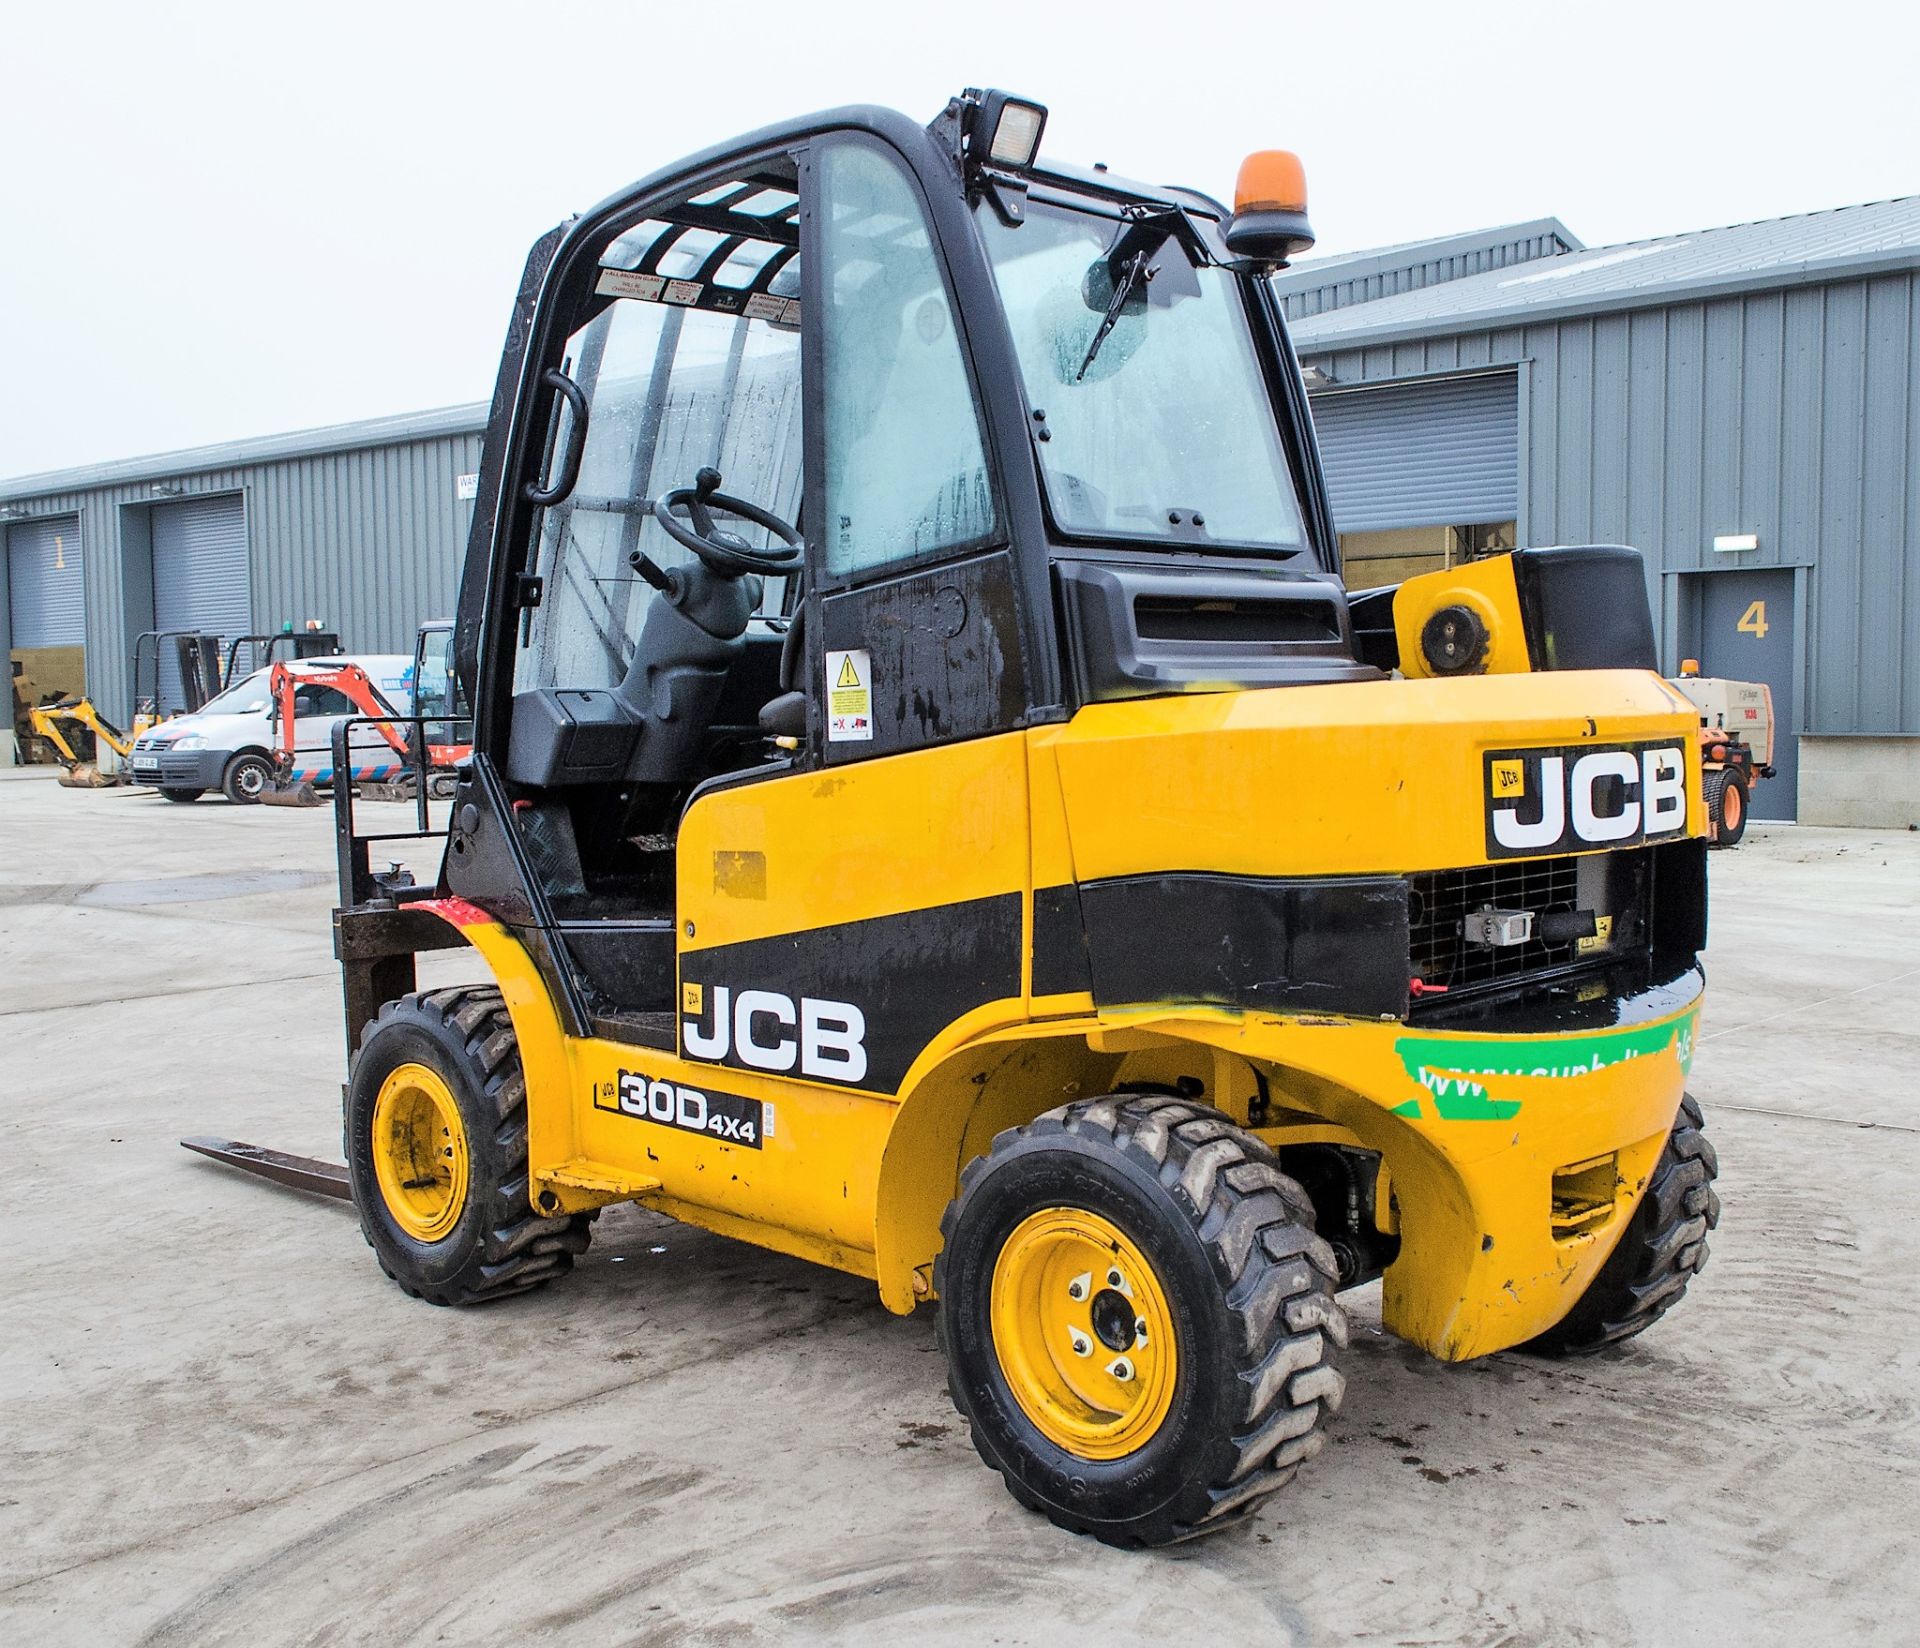 JCB Teletruk 30D 4x4 telescopic fork lift truck Year: 2013 S/N: 1541935 Recorded Hours: 1127 A623434 - Image 4 of 24